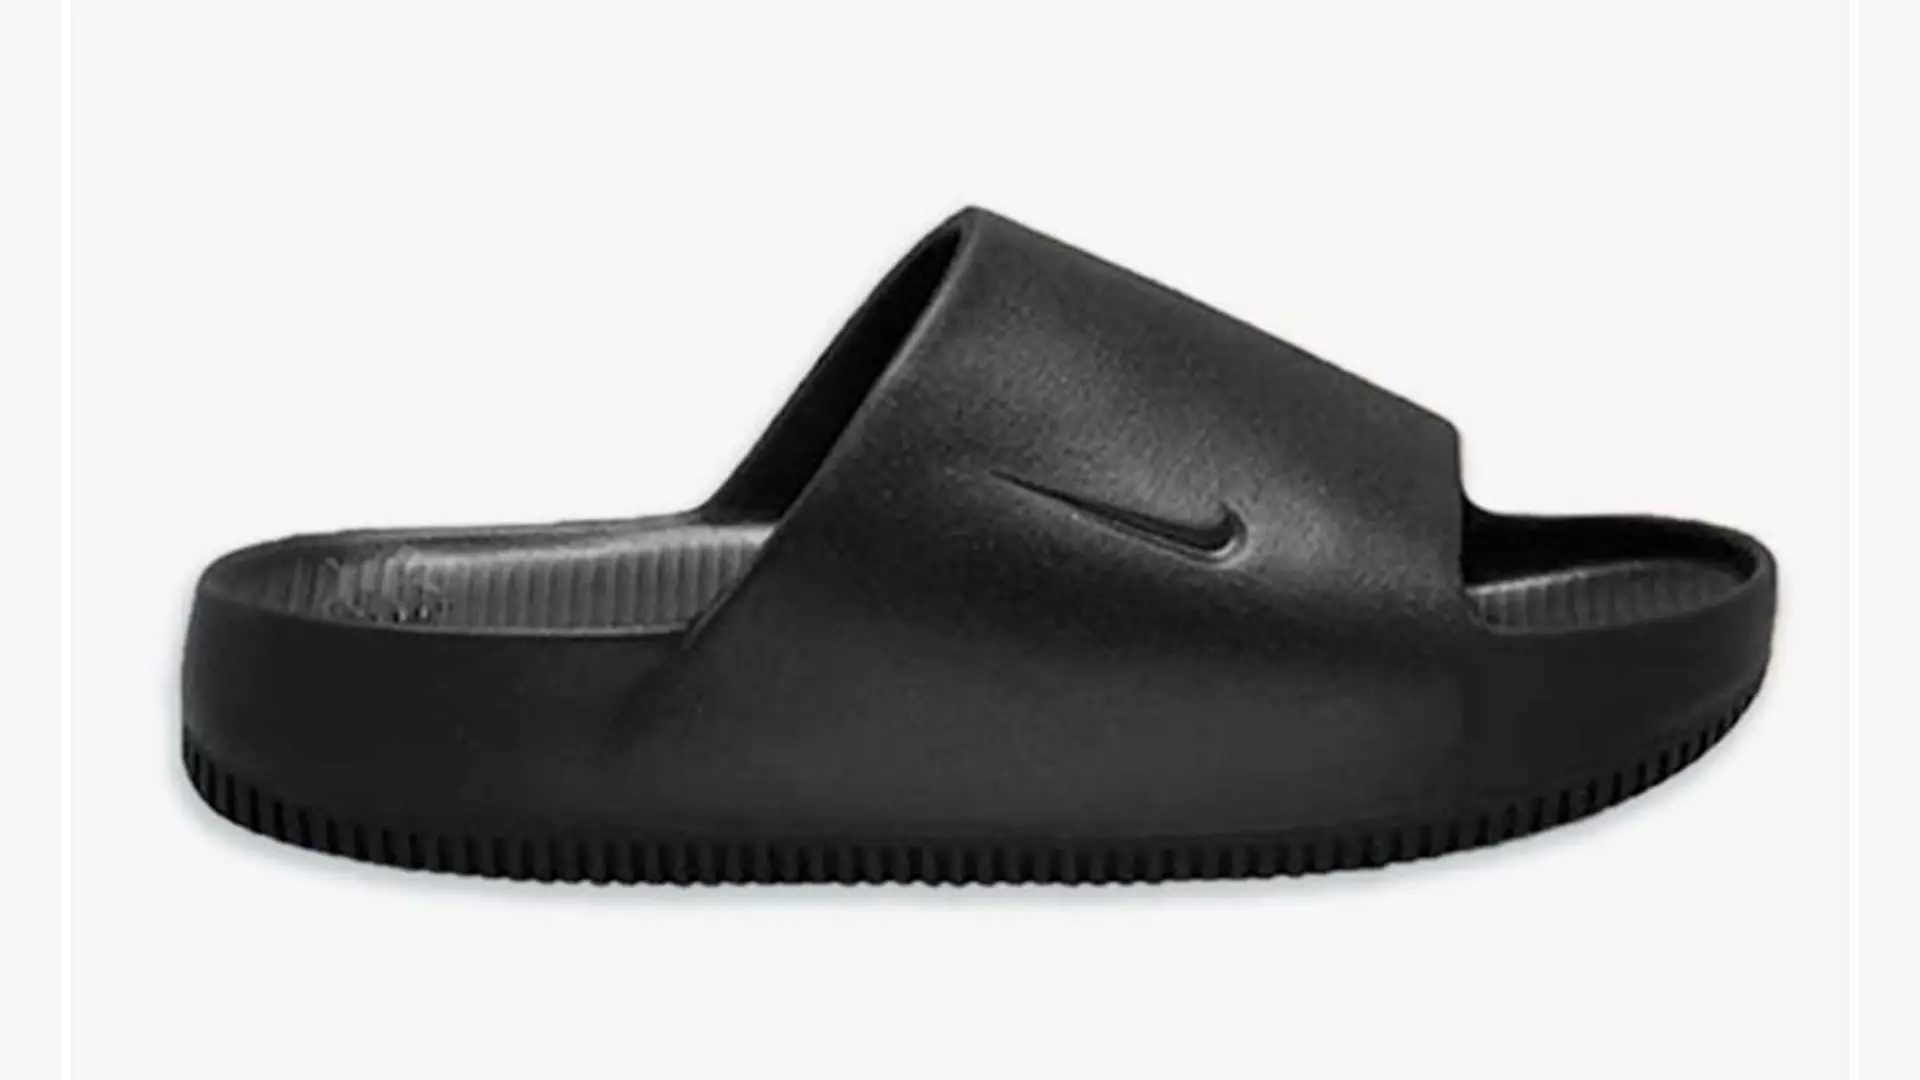 Keep Calm and Slide On: Nike's Newest Model Is Set To Fill a Certain ...